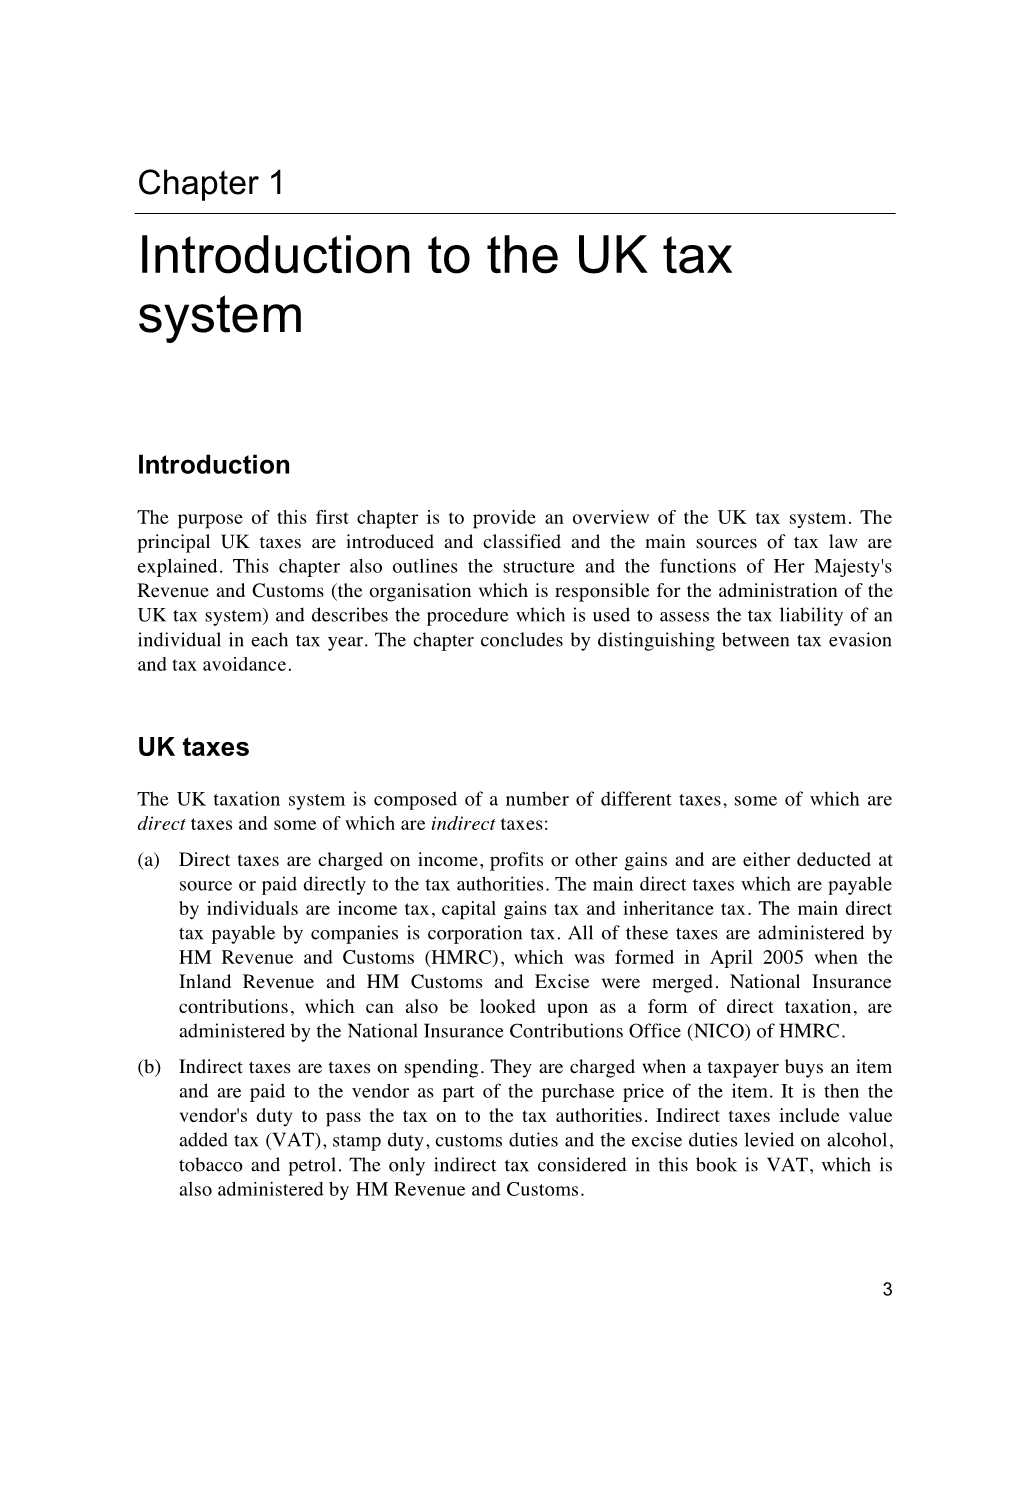 Introduction to the UK Tax System